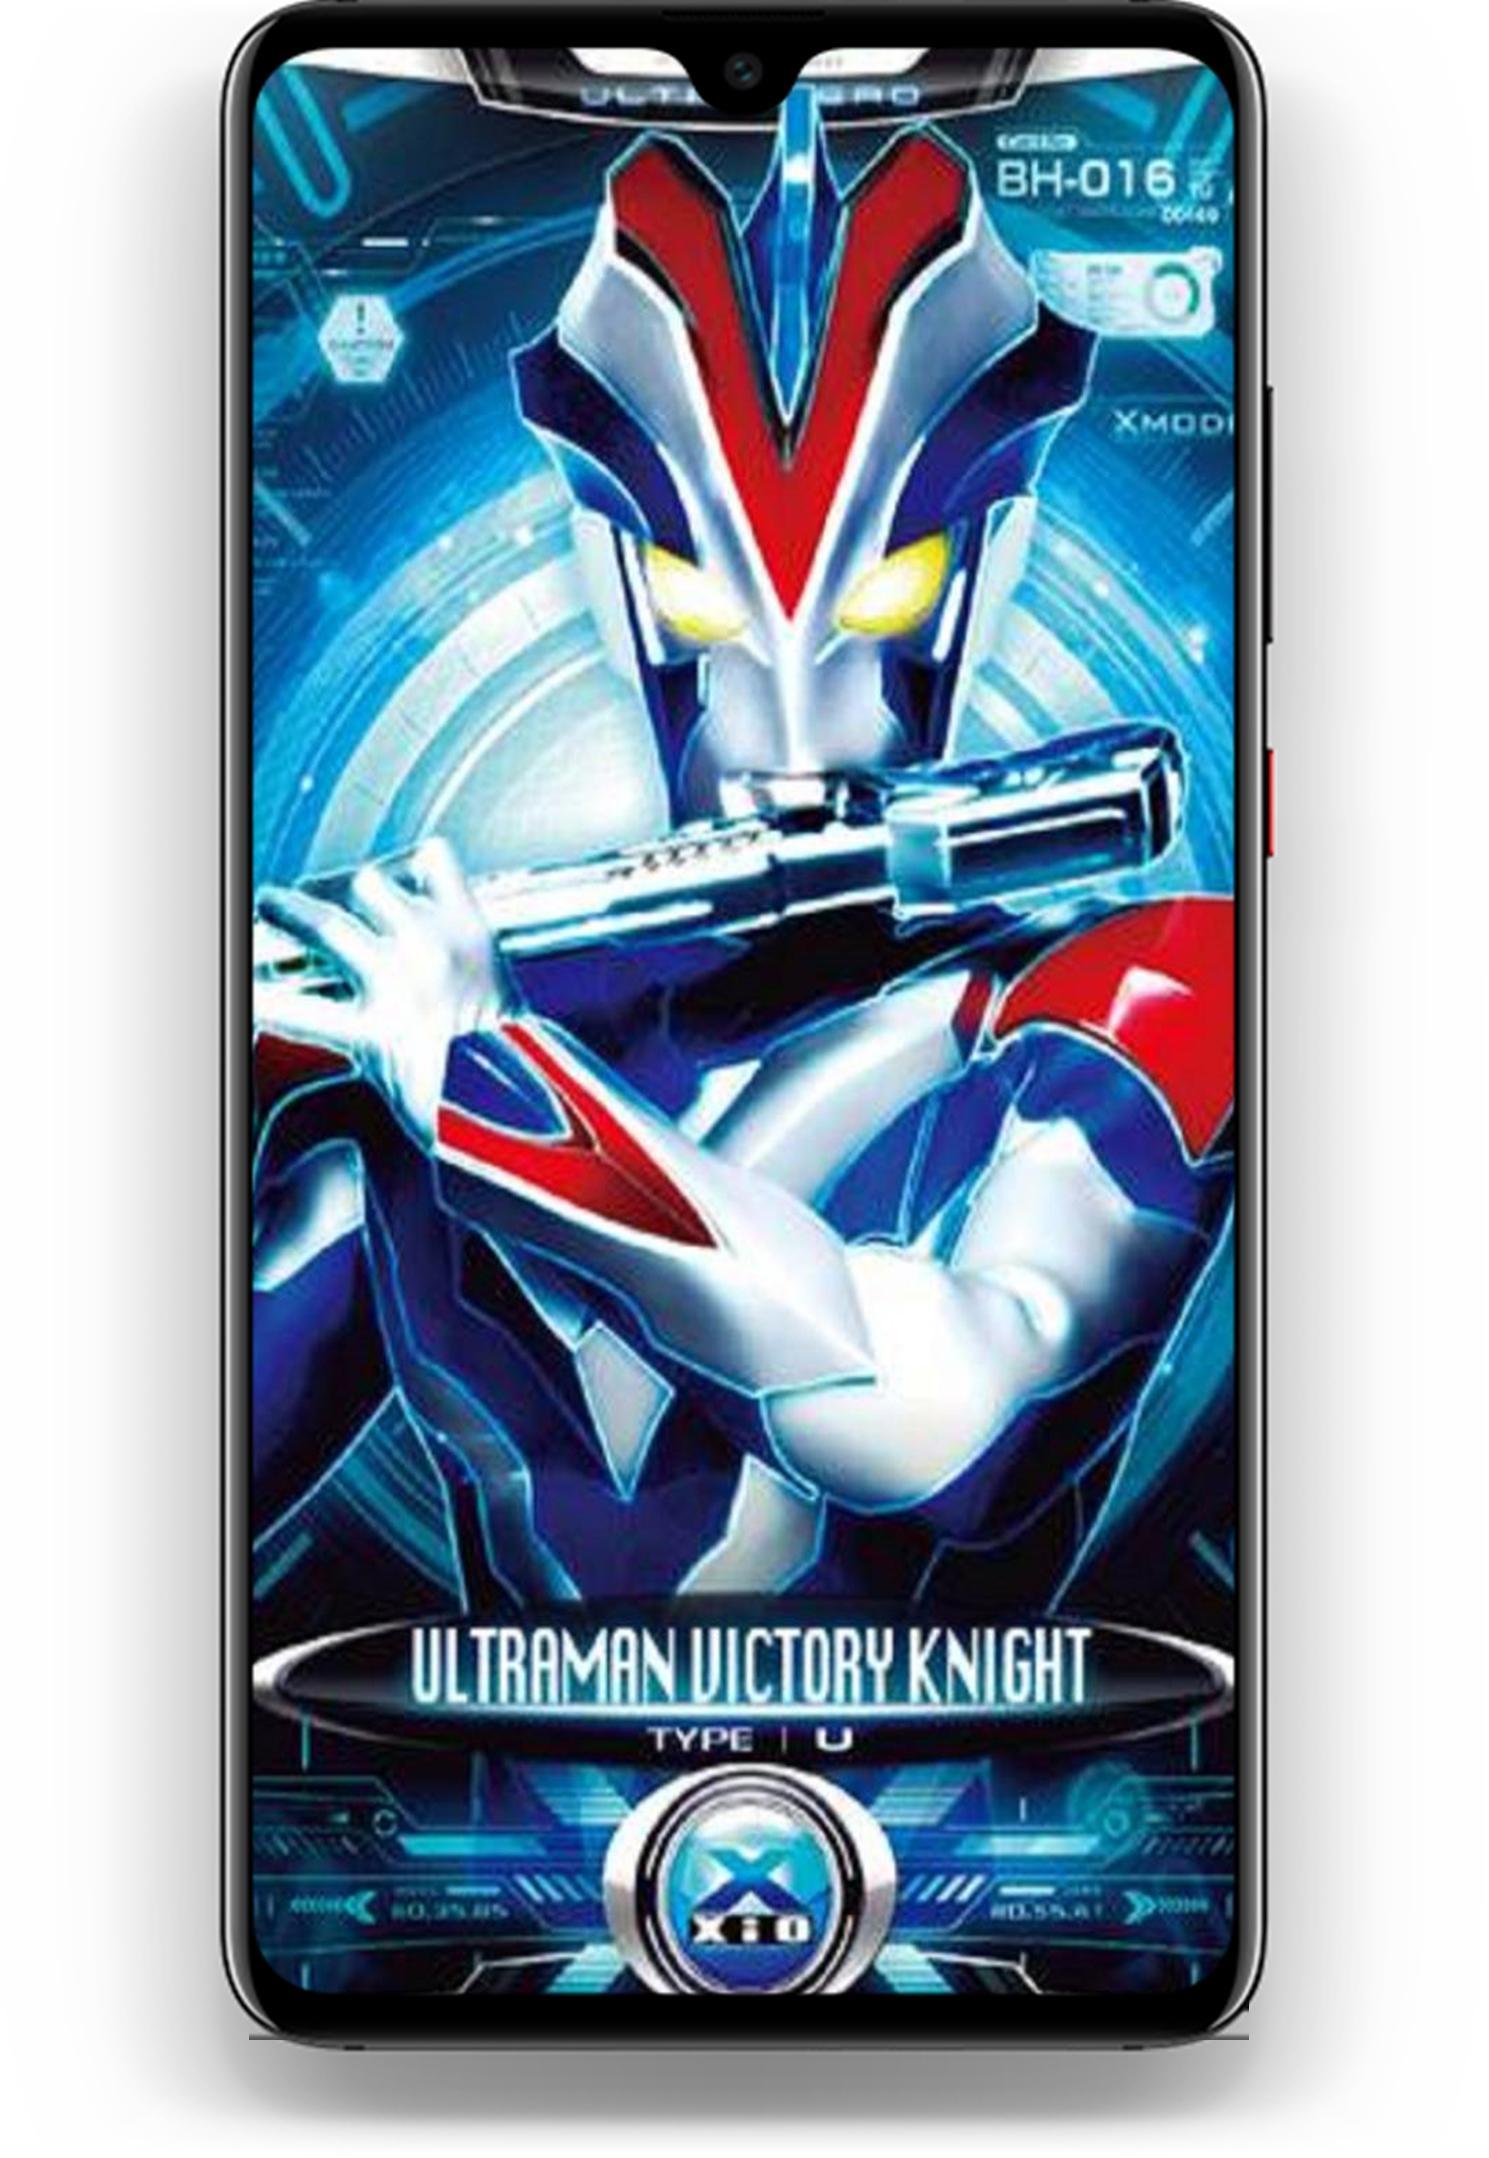 Ultraman Wallpaper For Android Apk